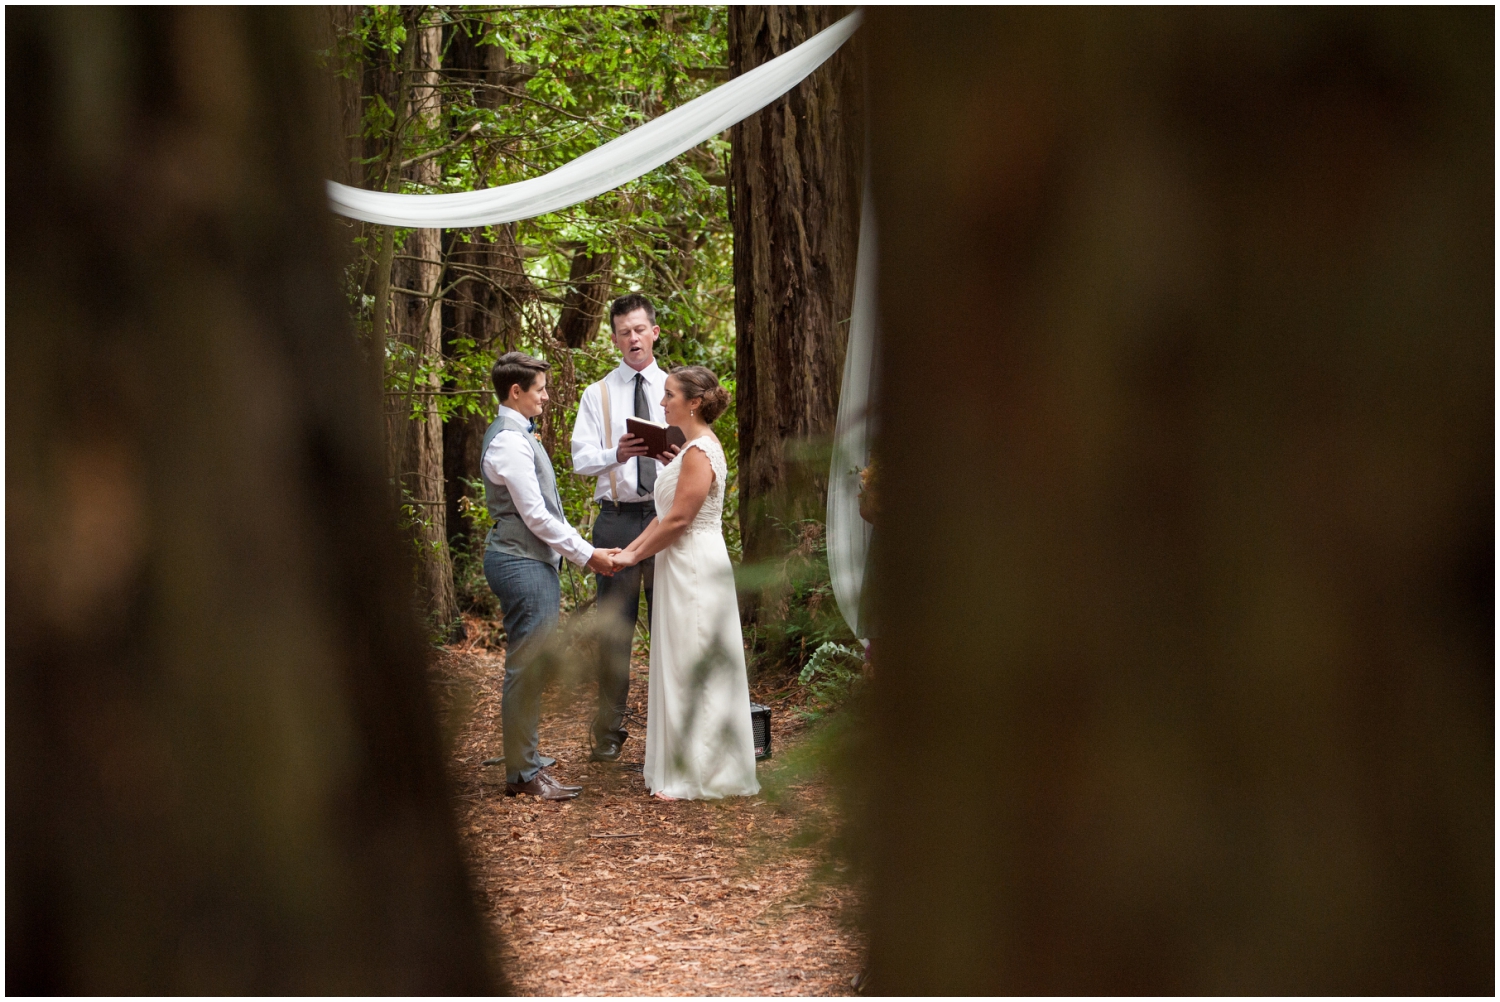 Married at the Roberts Recreation Area in the Oakland Hills